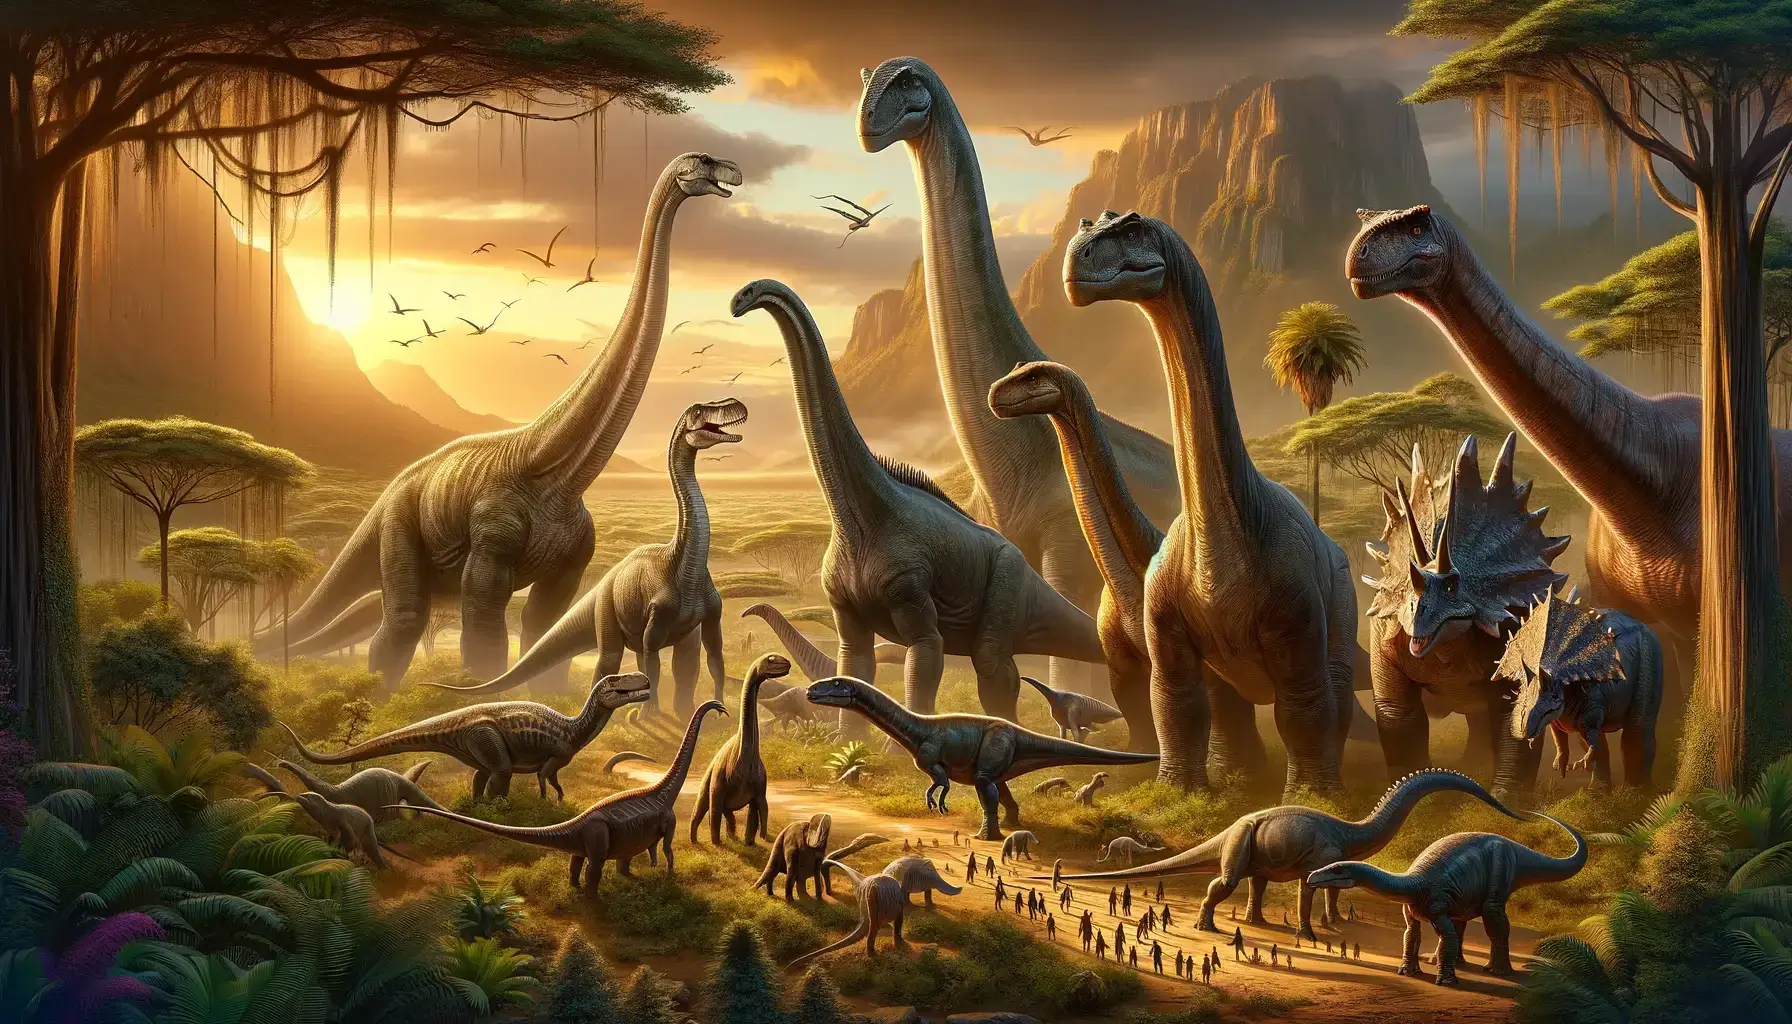 Display of the top 10 largest dinosaurs against a sunset backdrop.